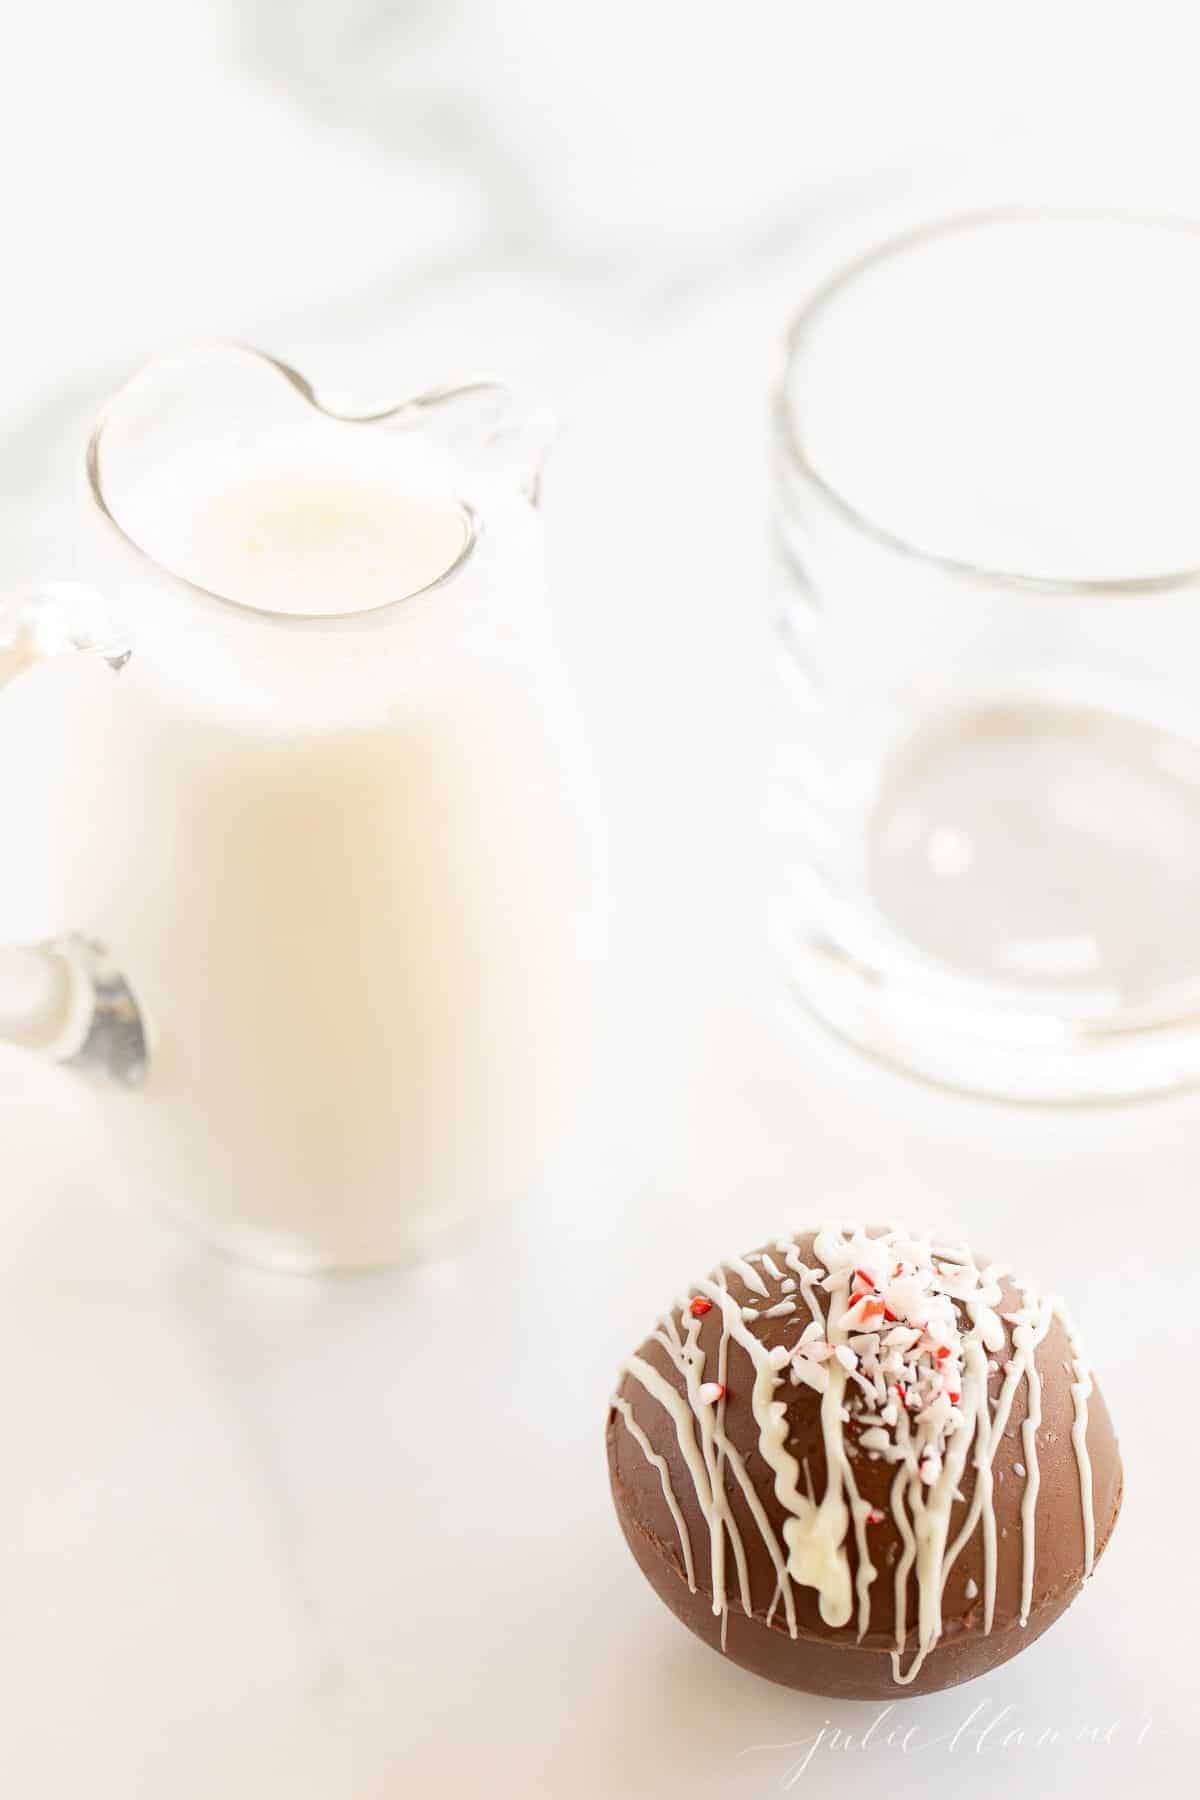 A clear glass pitcher of warm milk, clear mug in background, and a hot chocolate bomb.